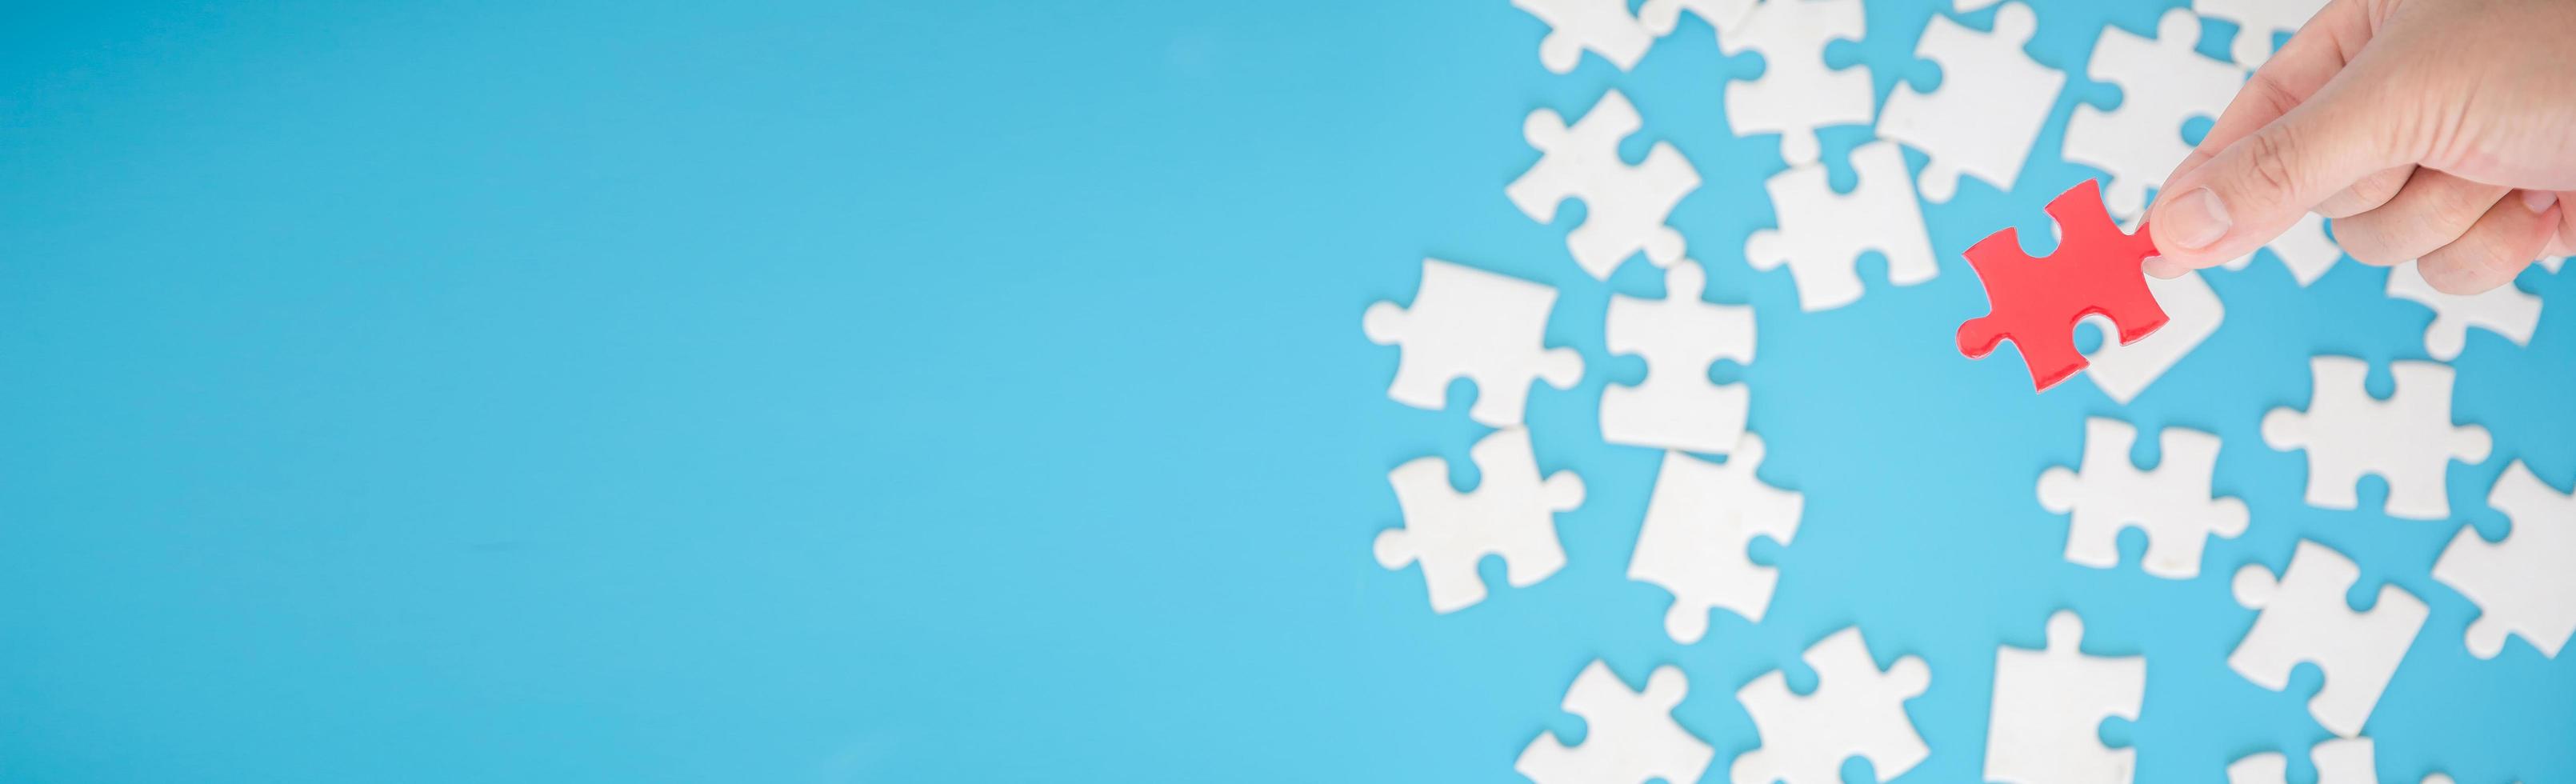 Top view of jigsaw puzzle on blue background photo